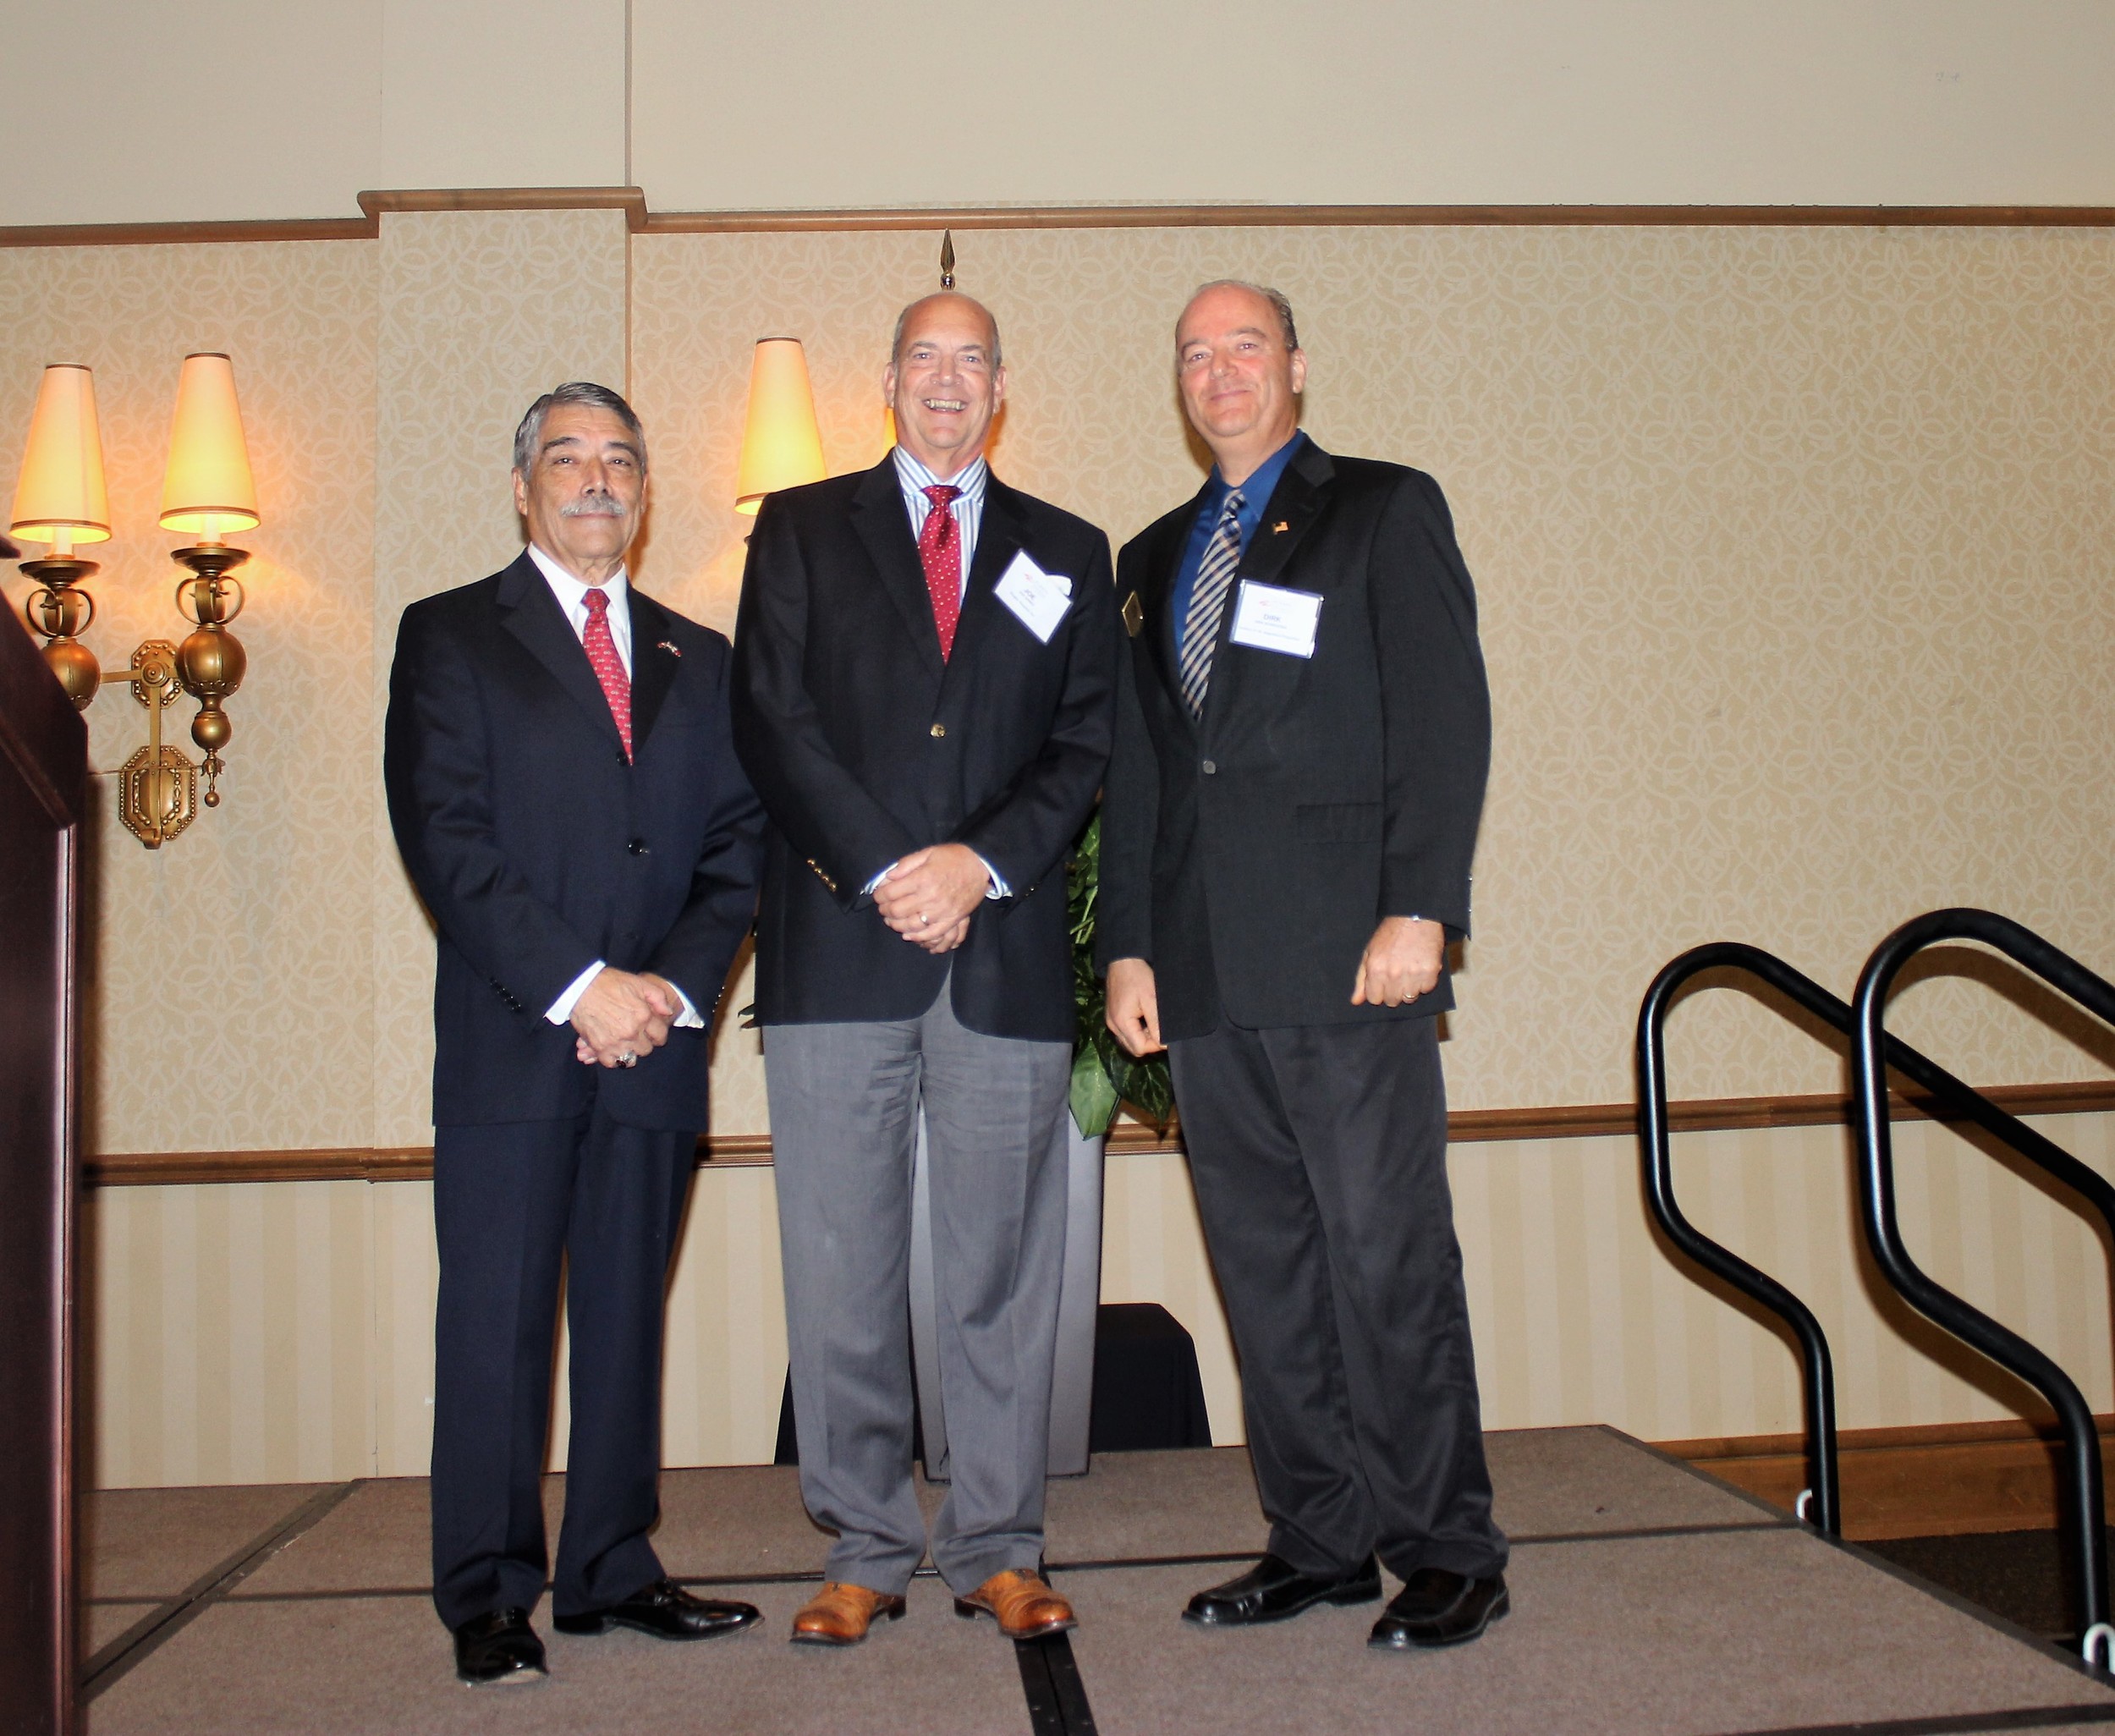 Flagler Hospital President Joe Gordy (center) receives the Fred Schroeder EDC Member of the Year Award from EDC Chair Victor Raymos (left) and Schroeder’s son, Dirk Schroeder.